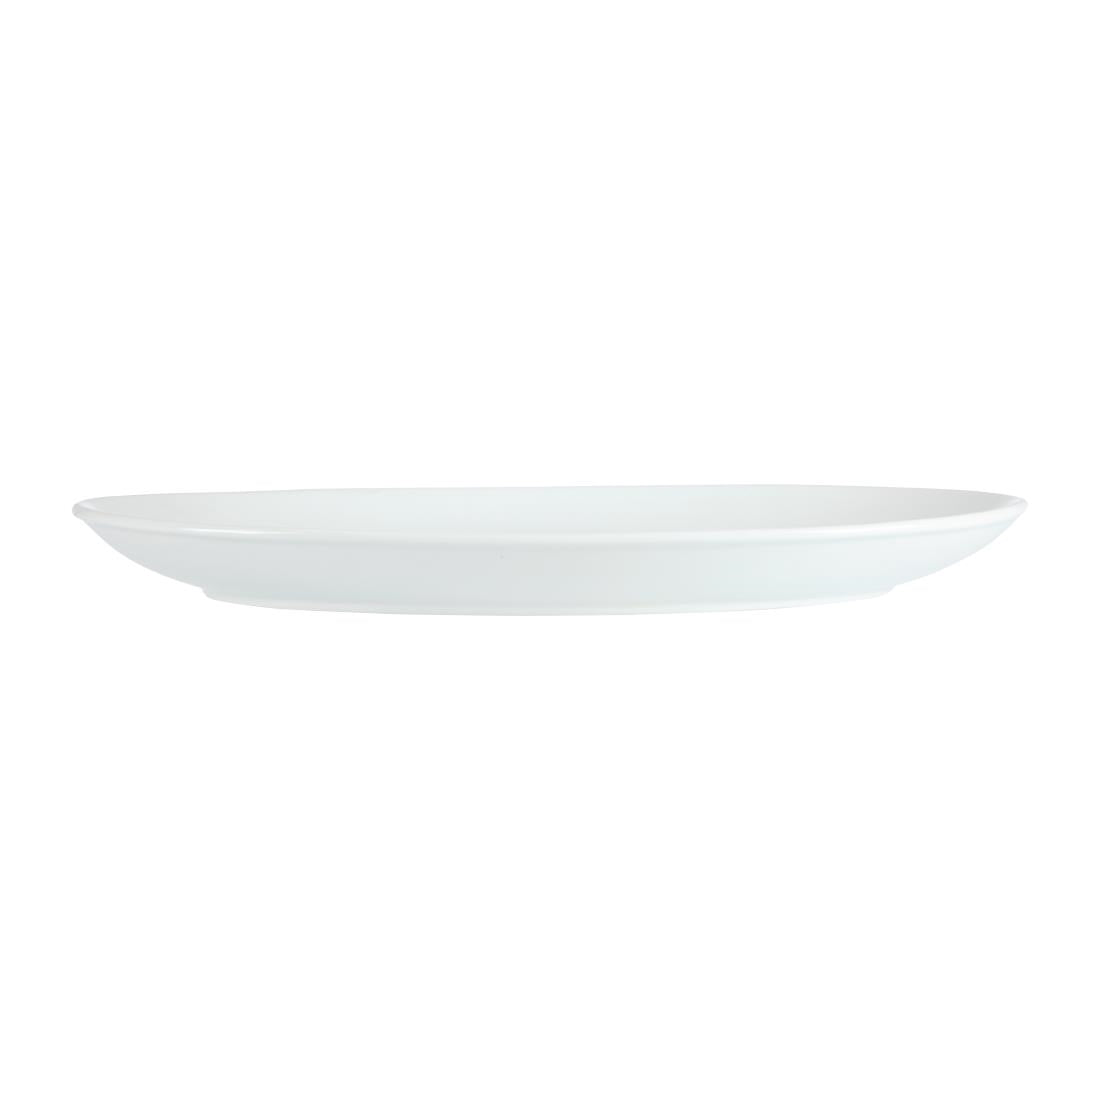 CC892 Olympia French Deep Oval Plates 500mm